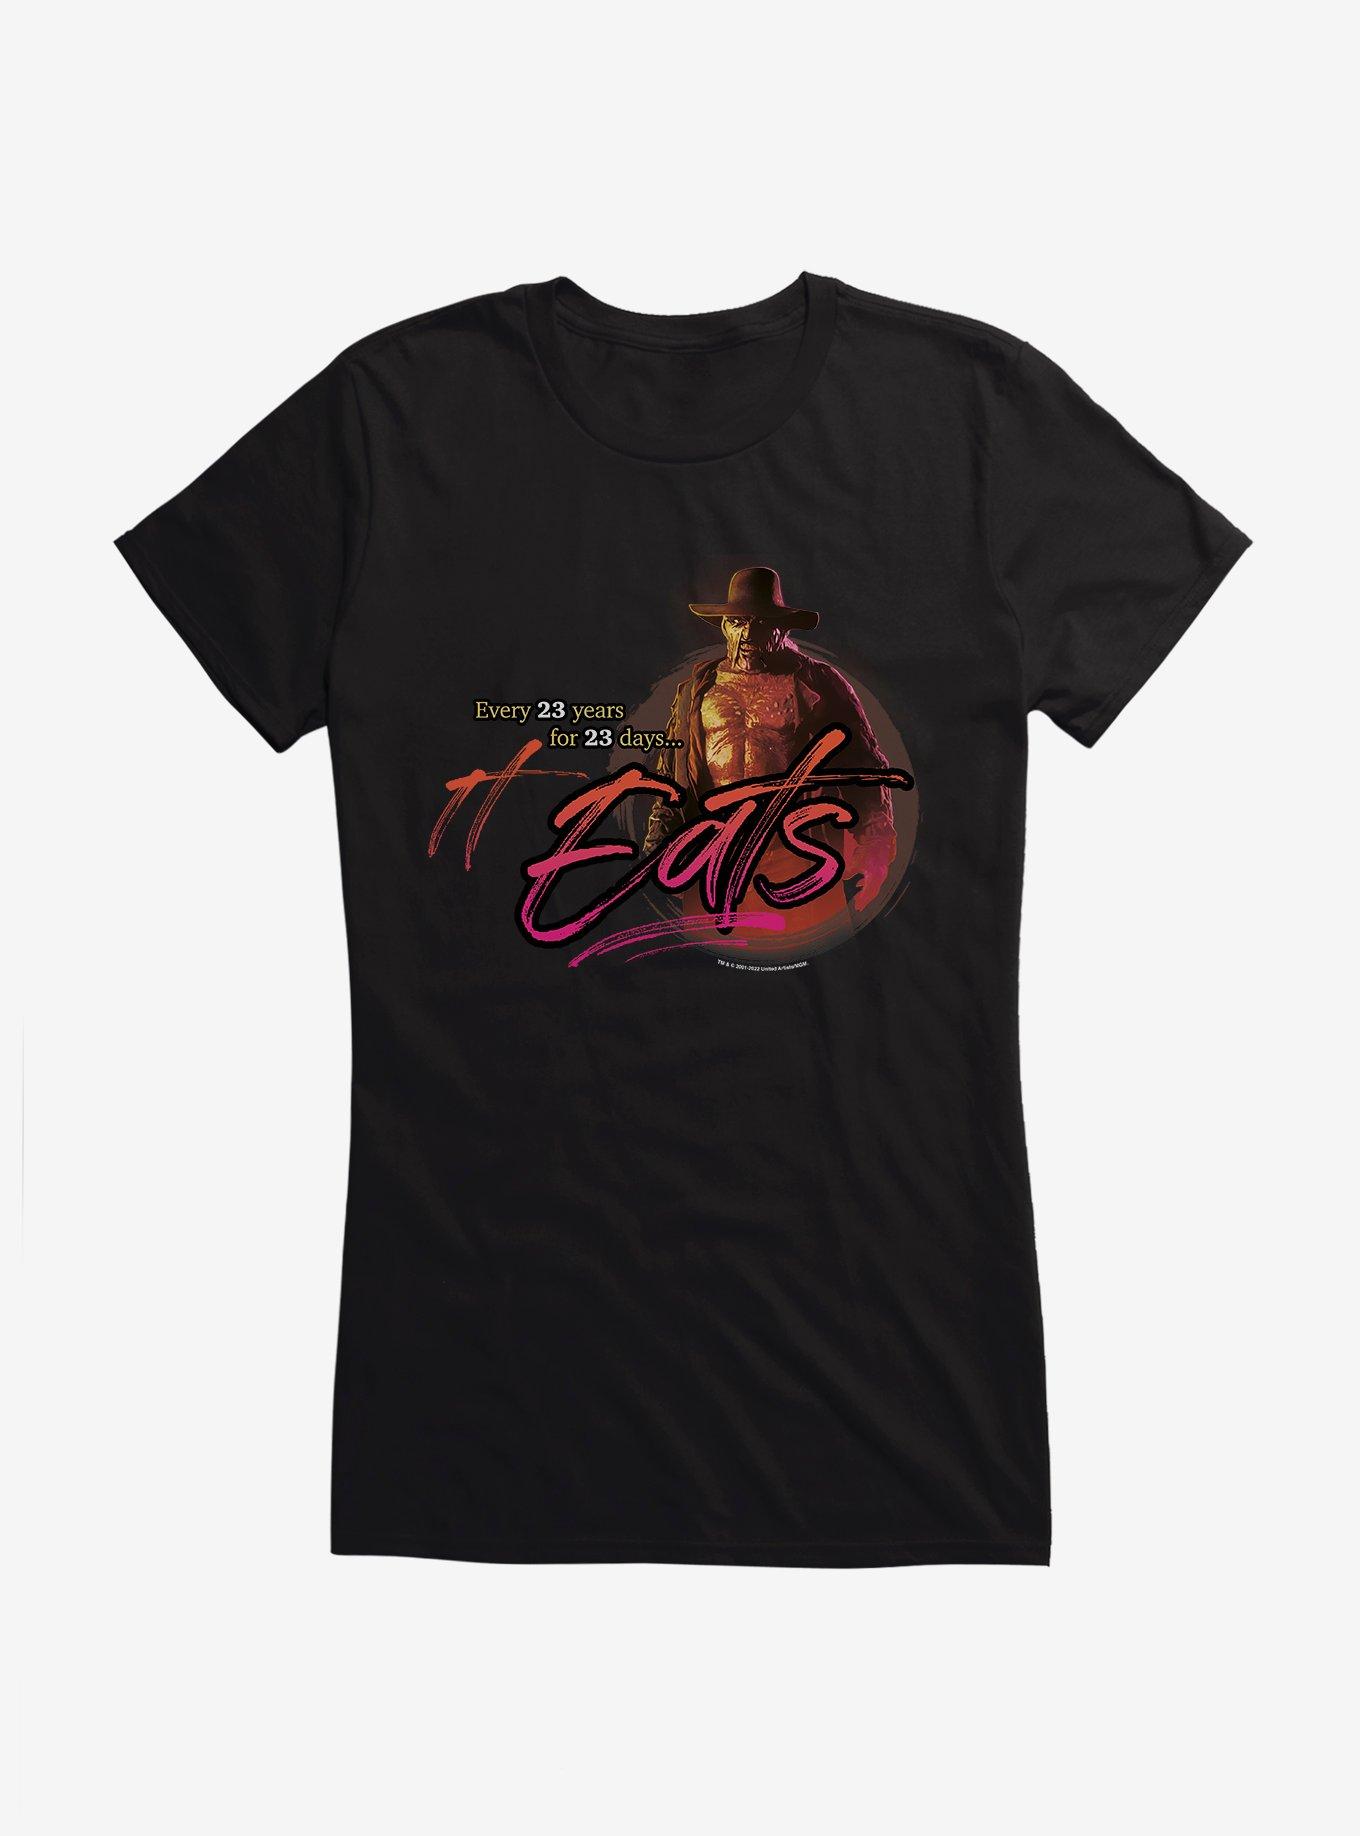 Jeepers Creepers It Eats Girls T-Shirt, BLACK, hi-res